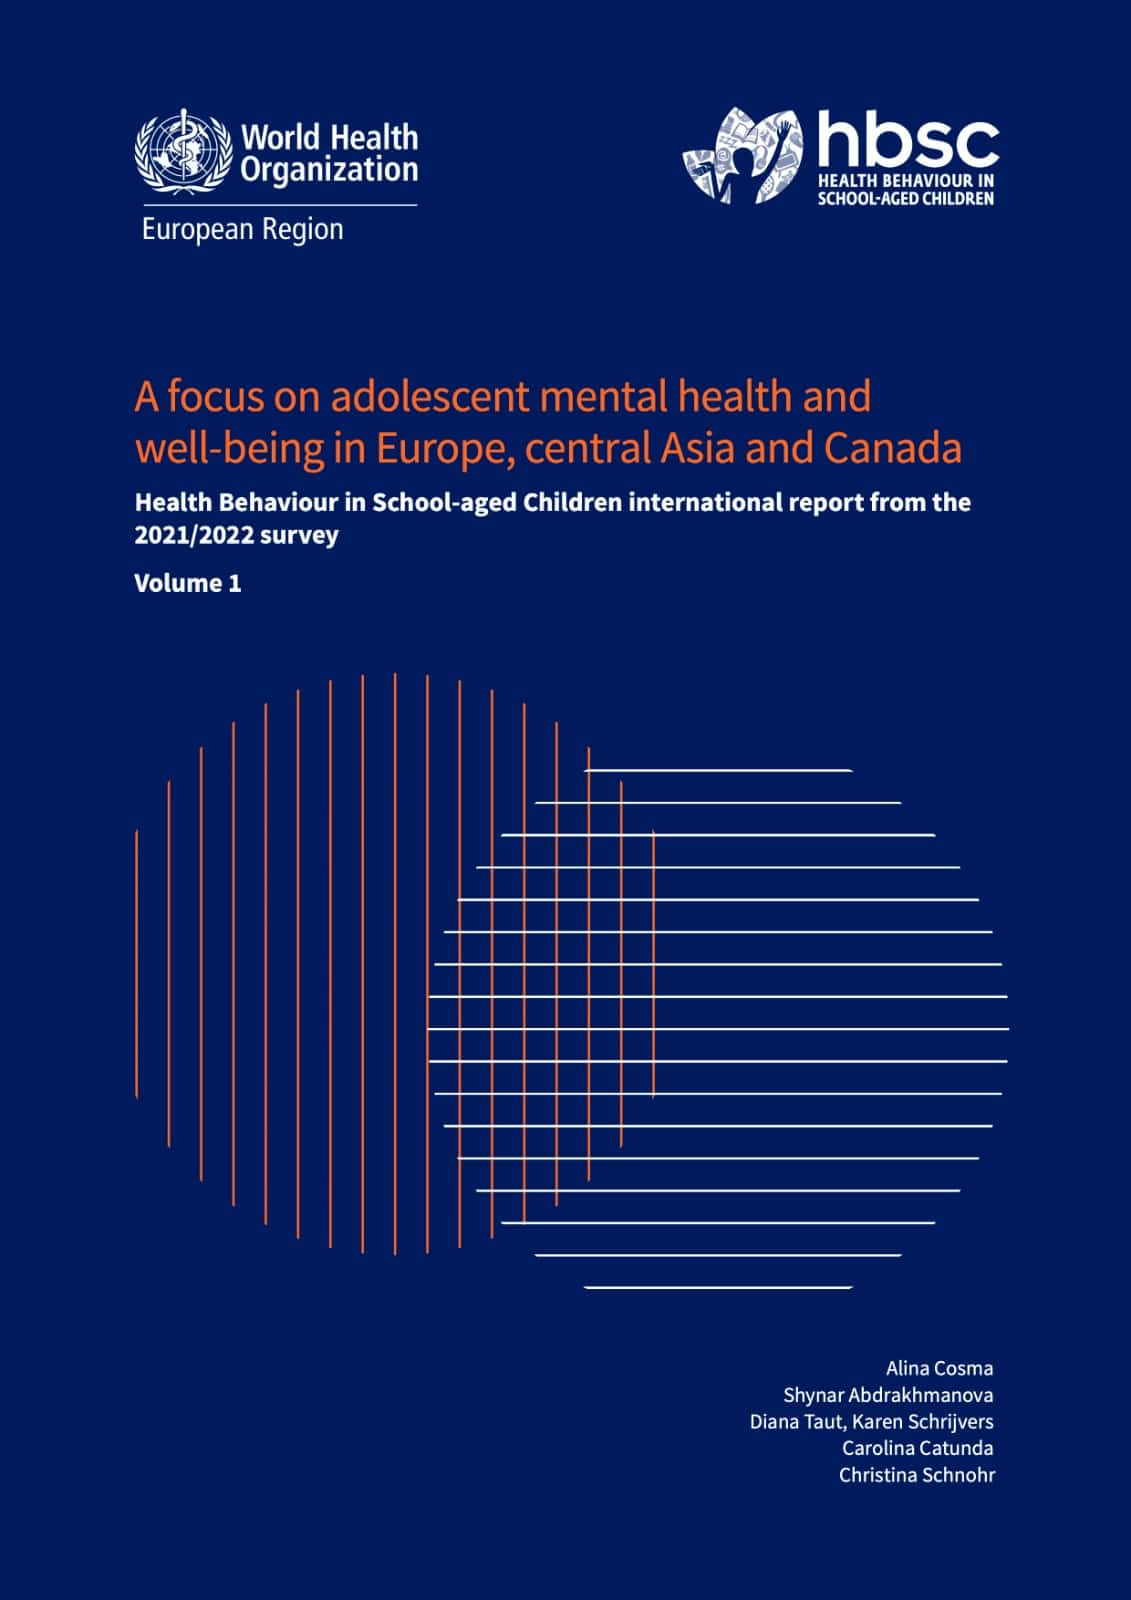 Thumnail of cover page from HBSC report on mental health